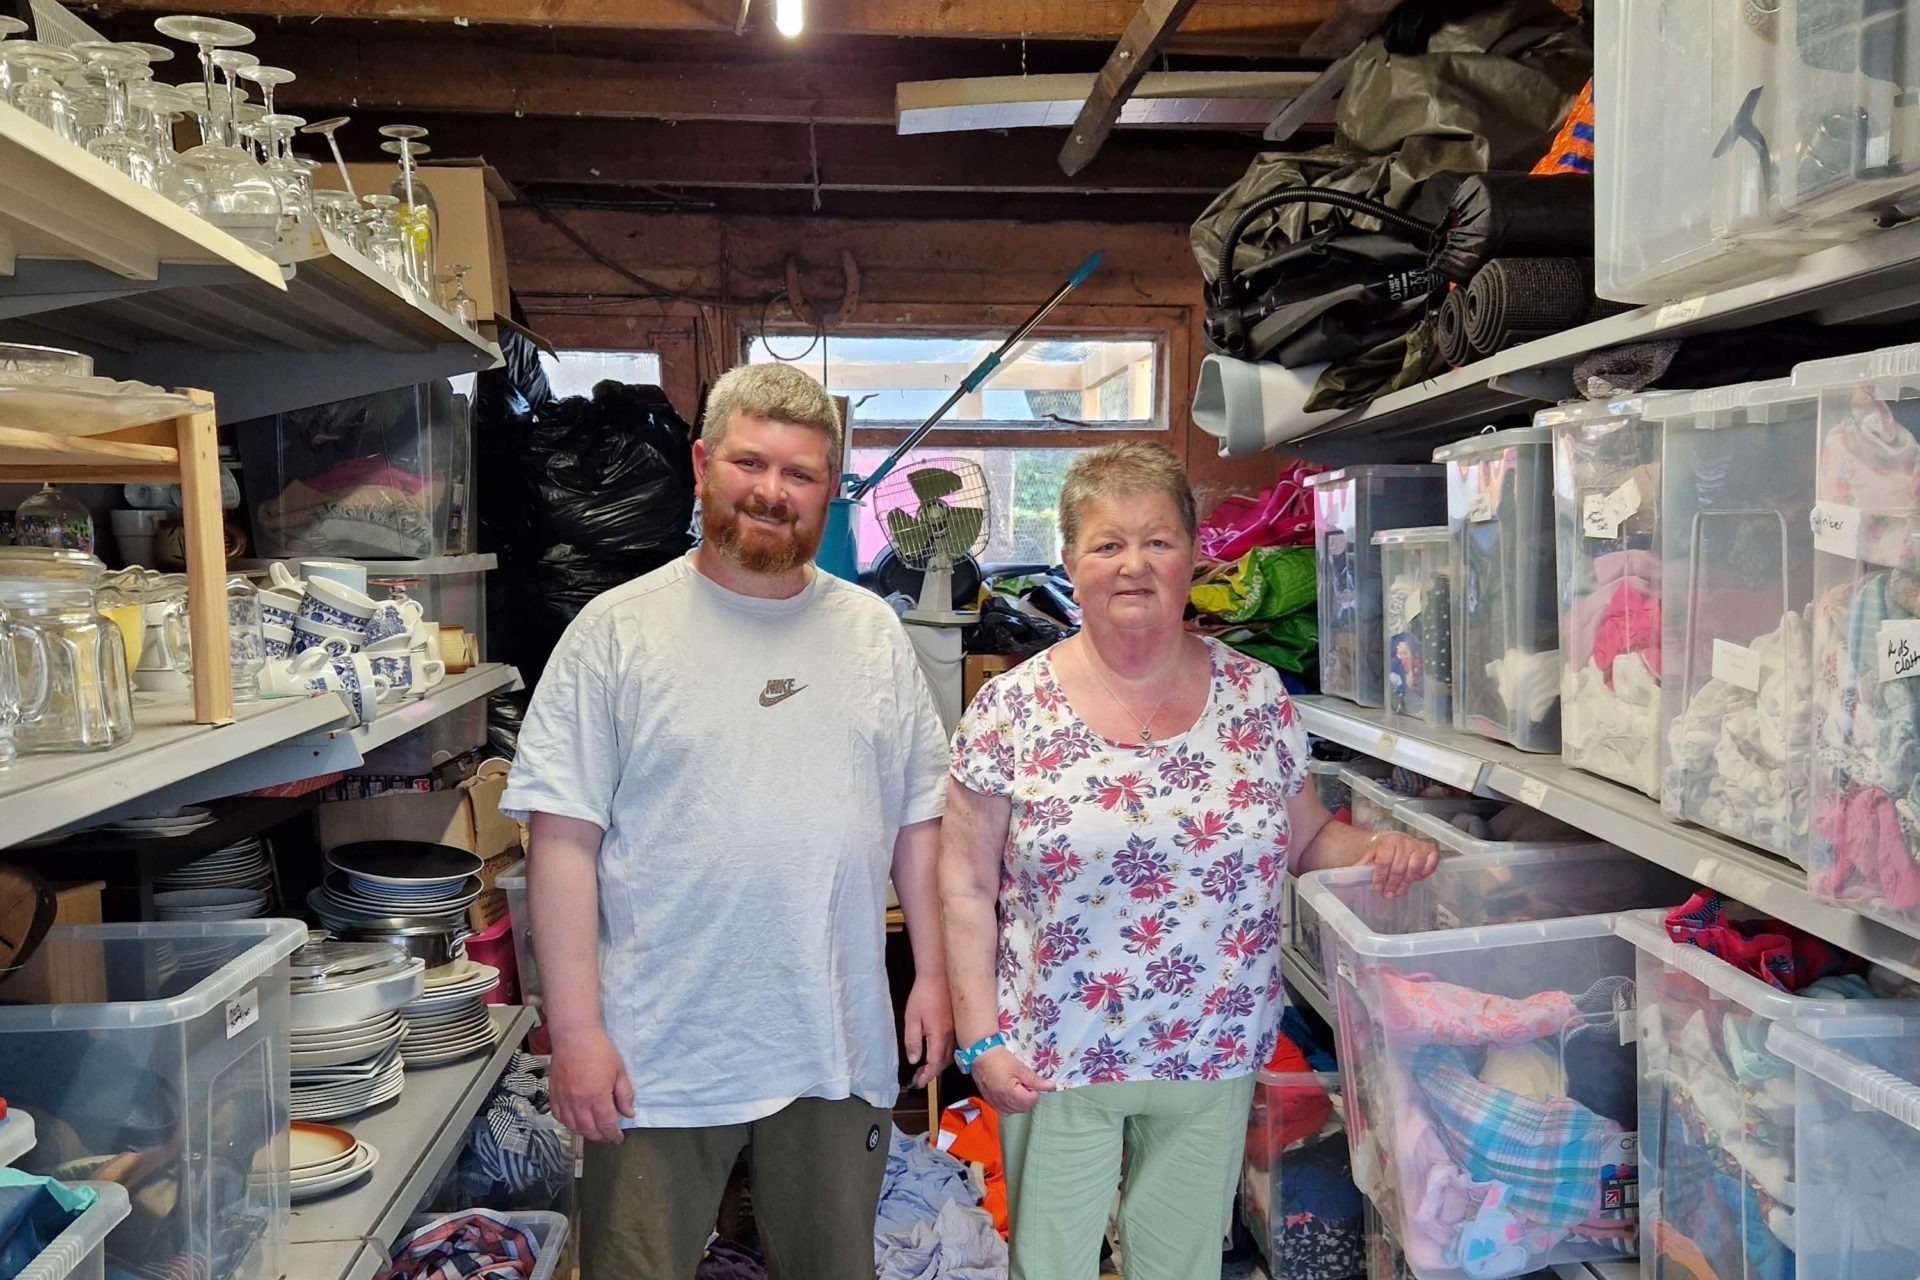 Mark and Alison Battleday in Alison's garage where donations for the Samaritans Shop are stored.